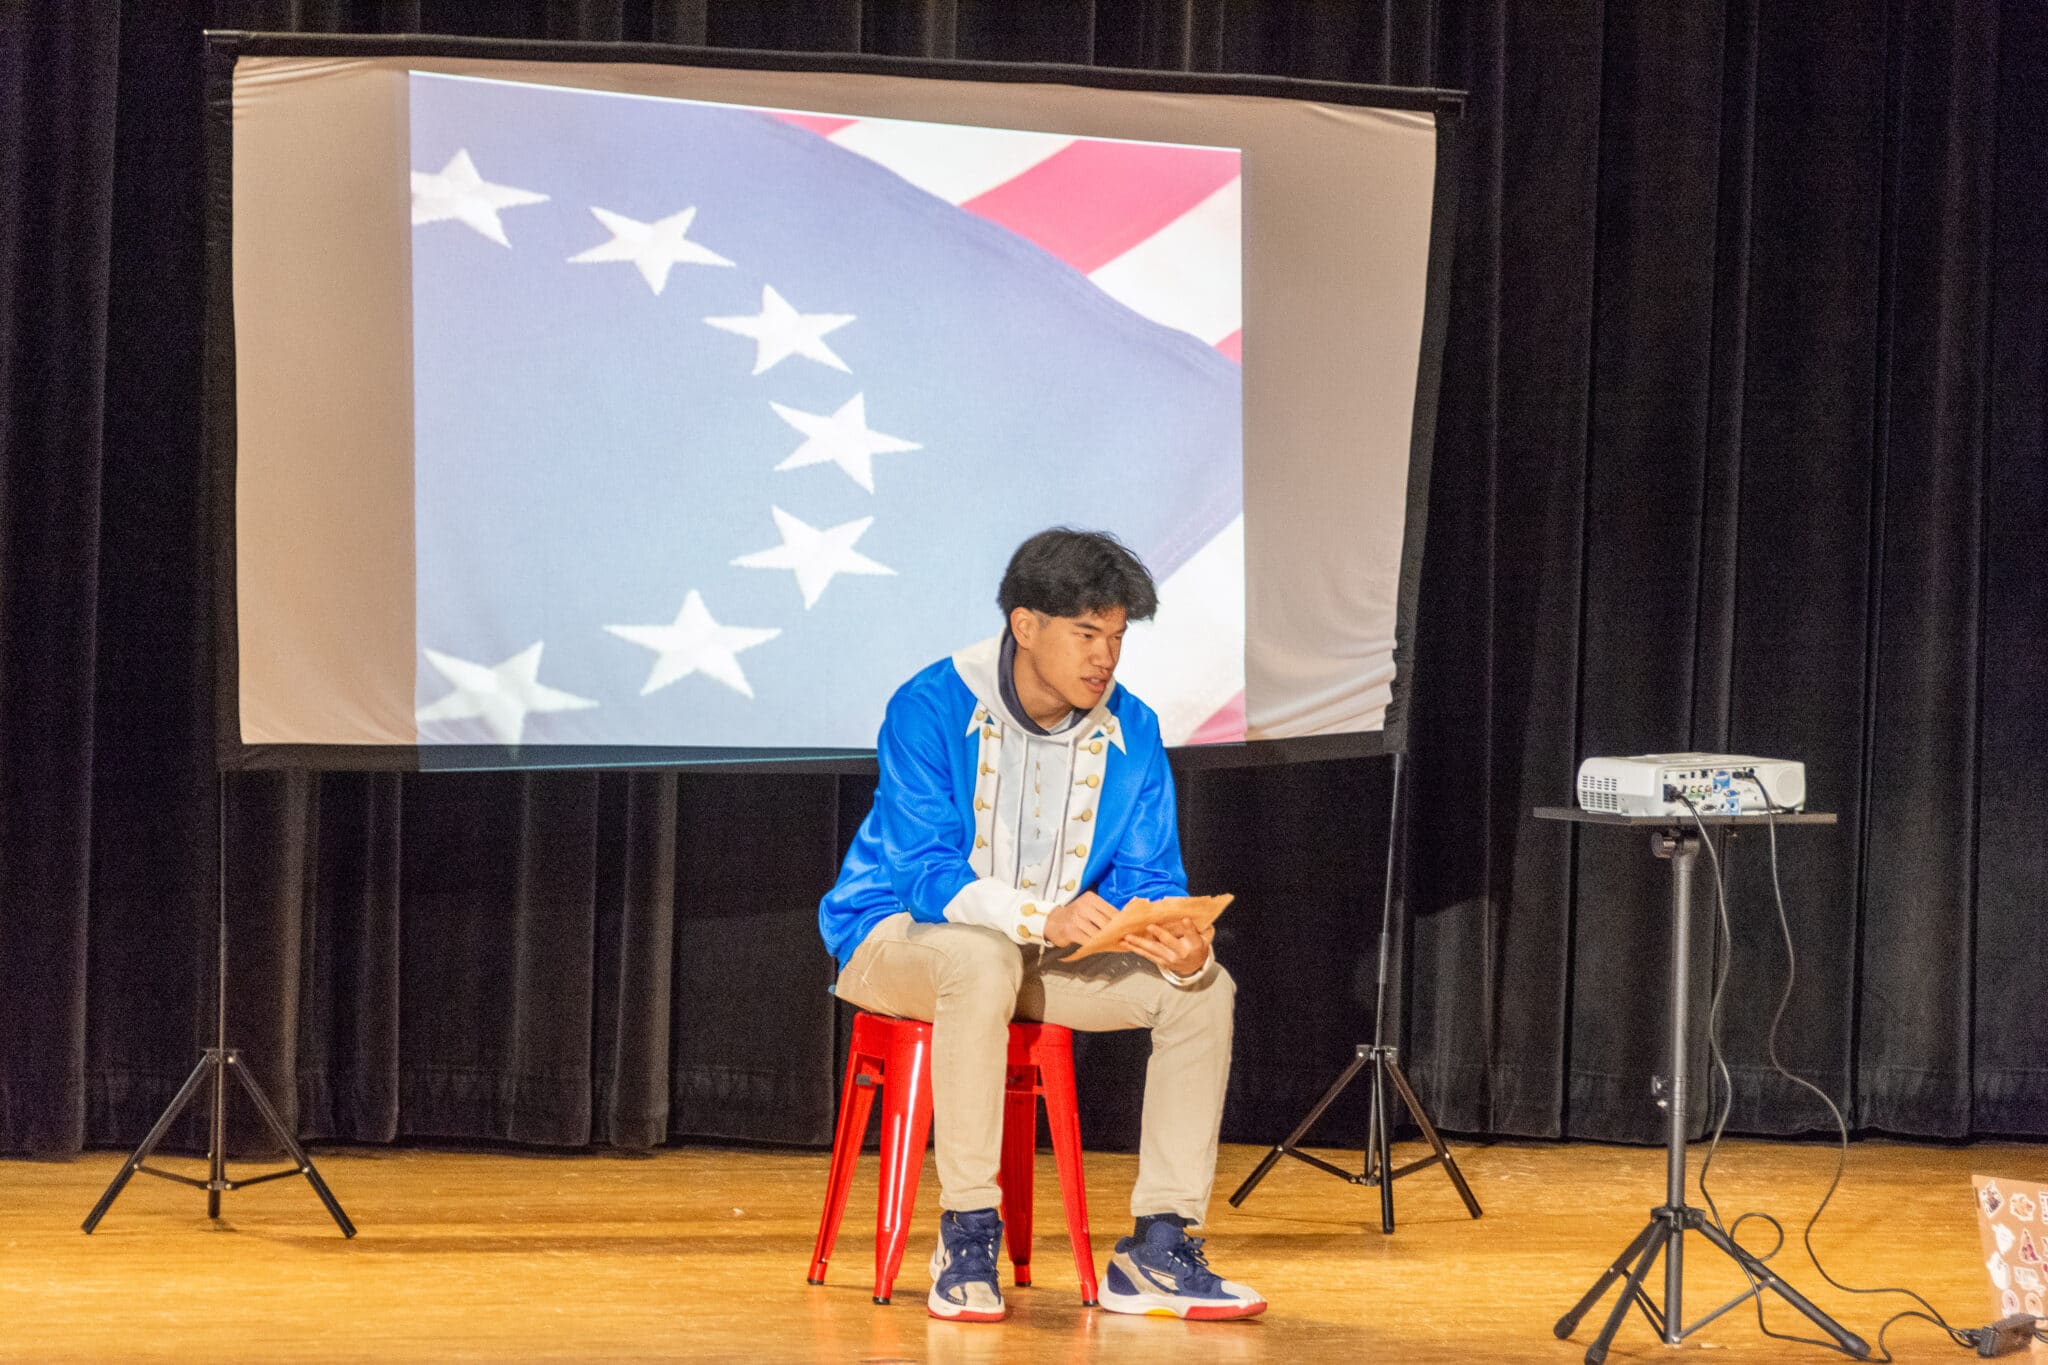 Student sitting on stage giving presentation behind PowerPoint screen with American flag on it